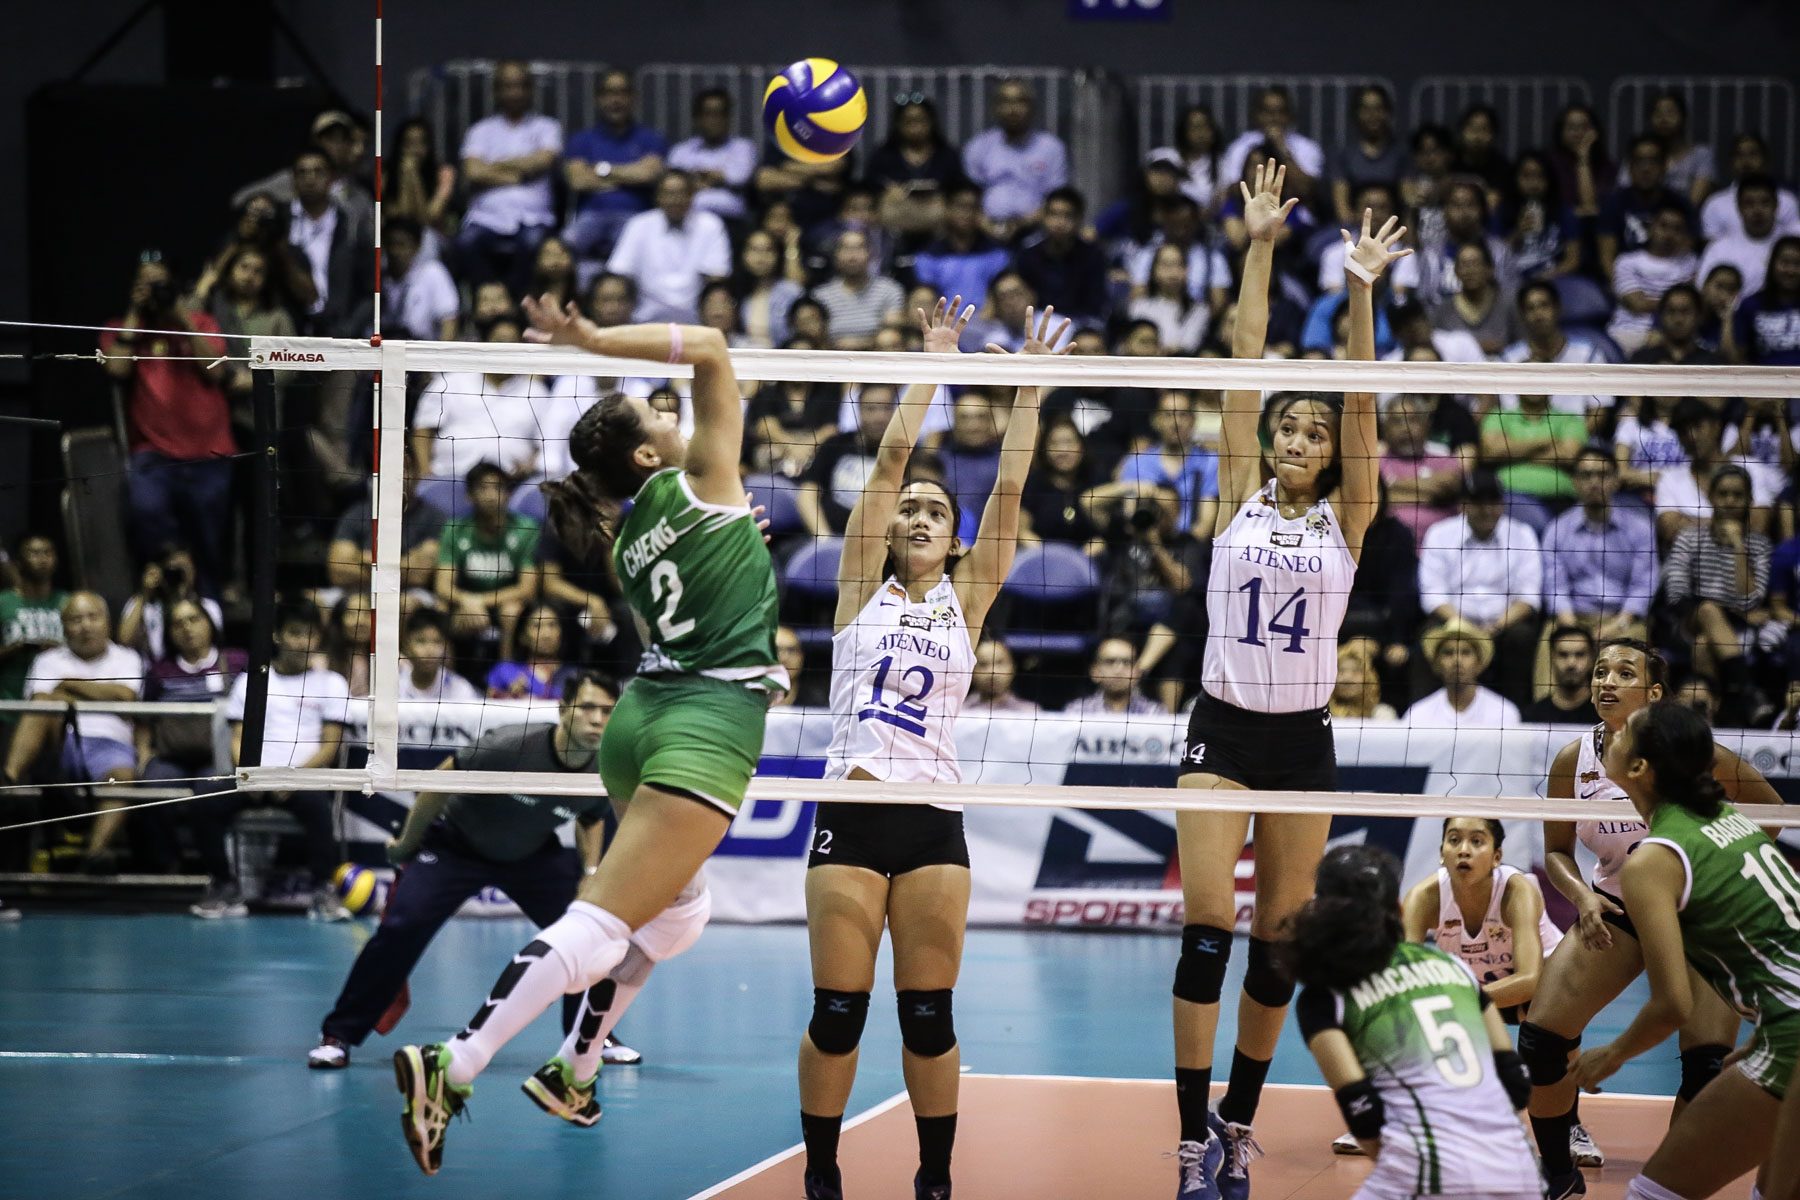 Bea De Leon vows Ateneo will live up to Heartstrong mantra